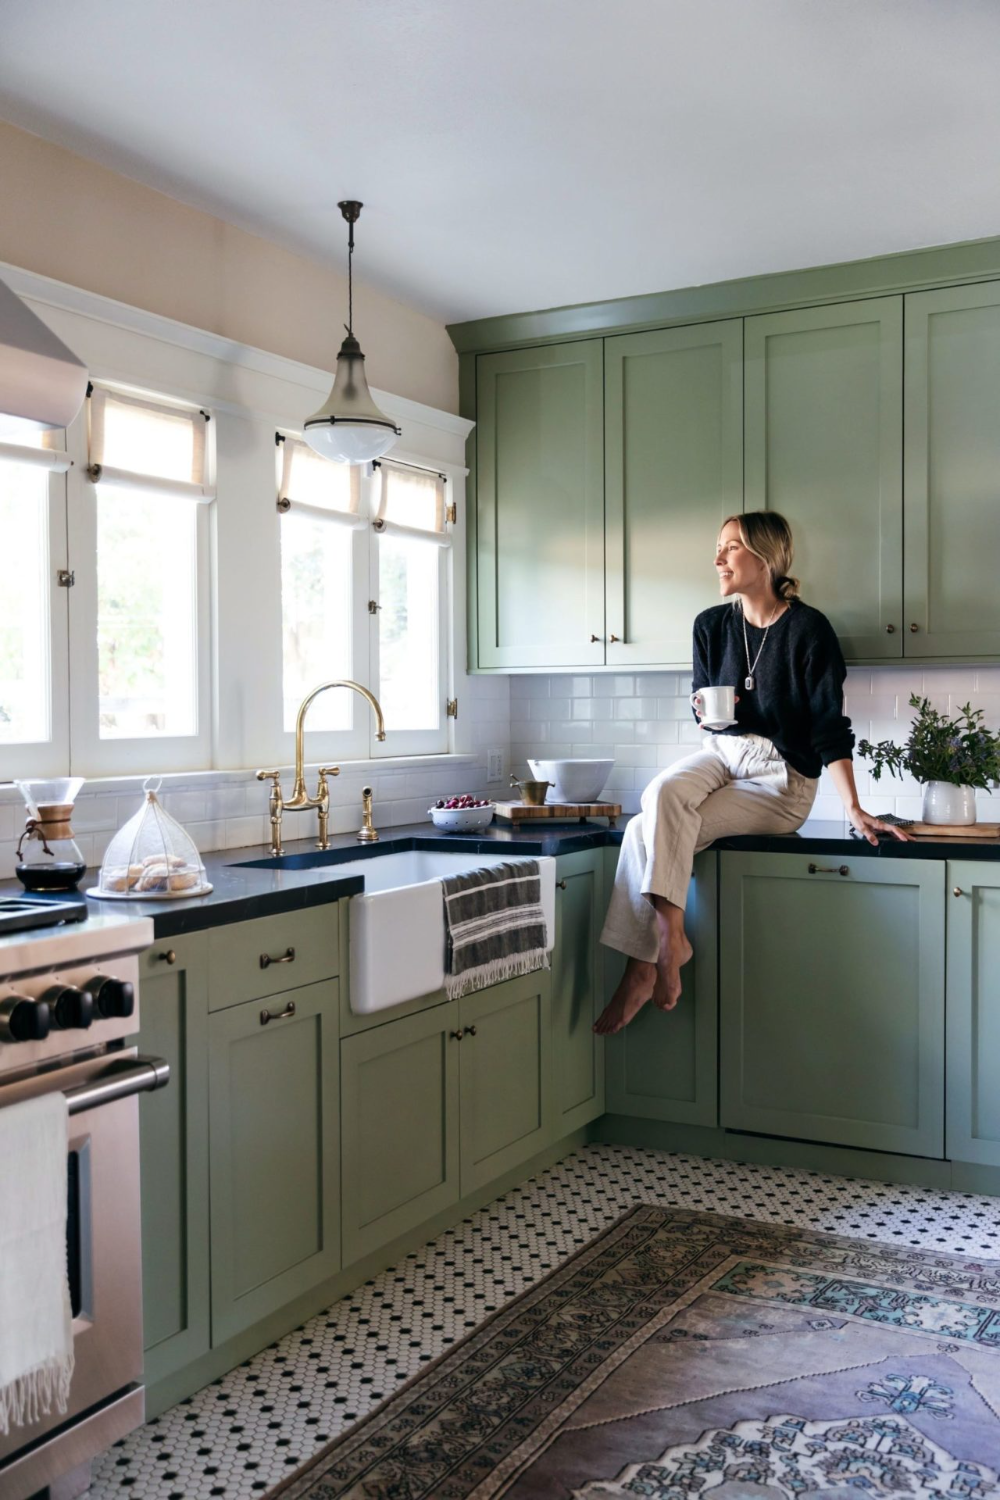 Get a new look to your old kitchen with a
  great renovation plan